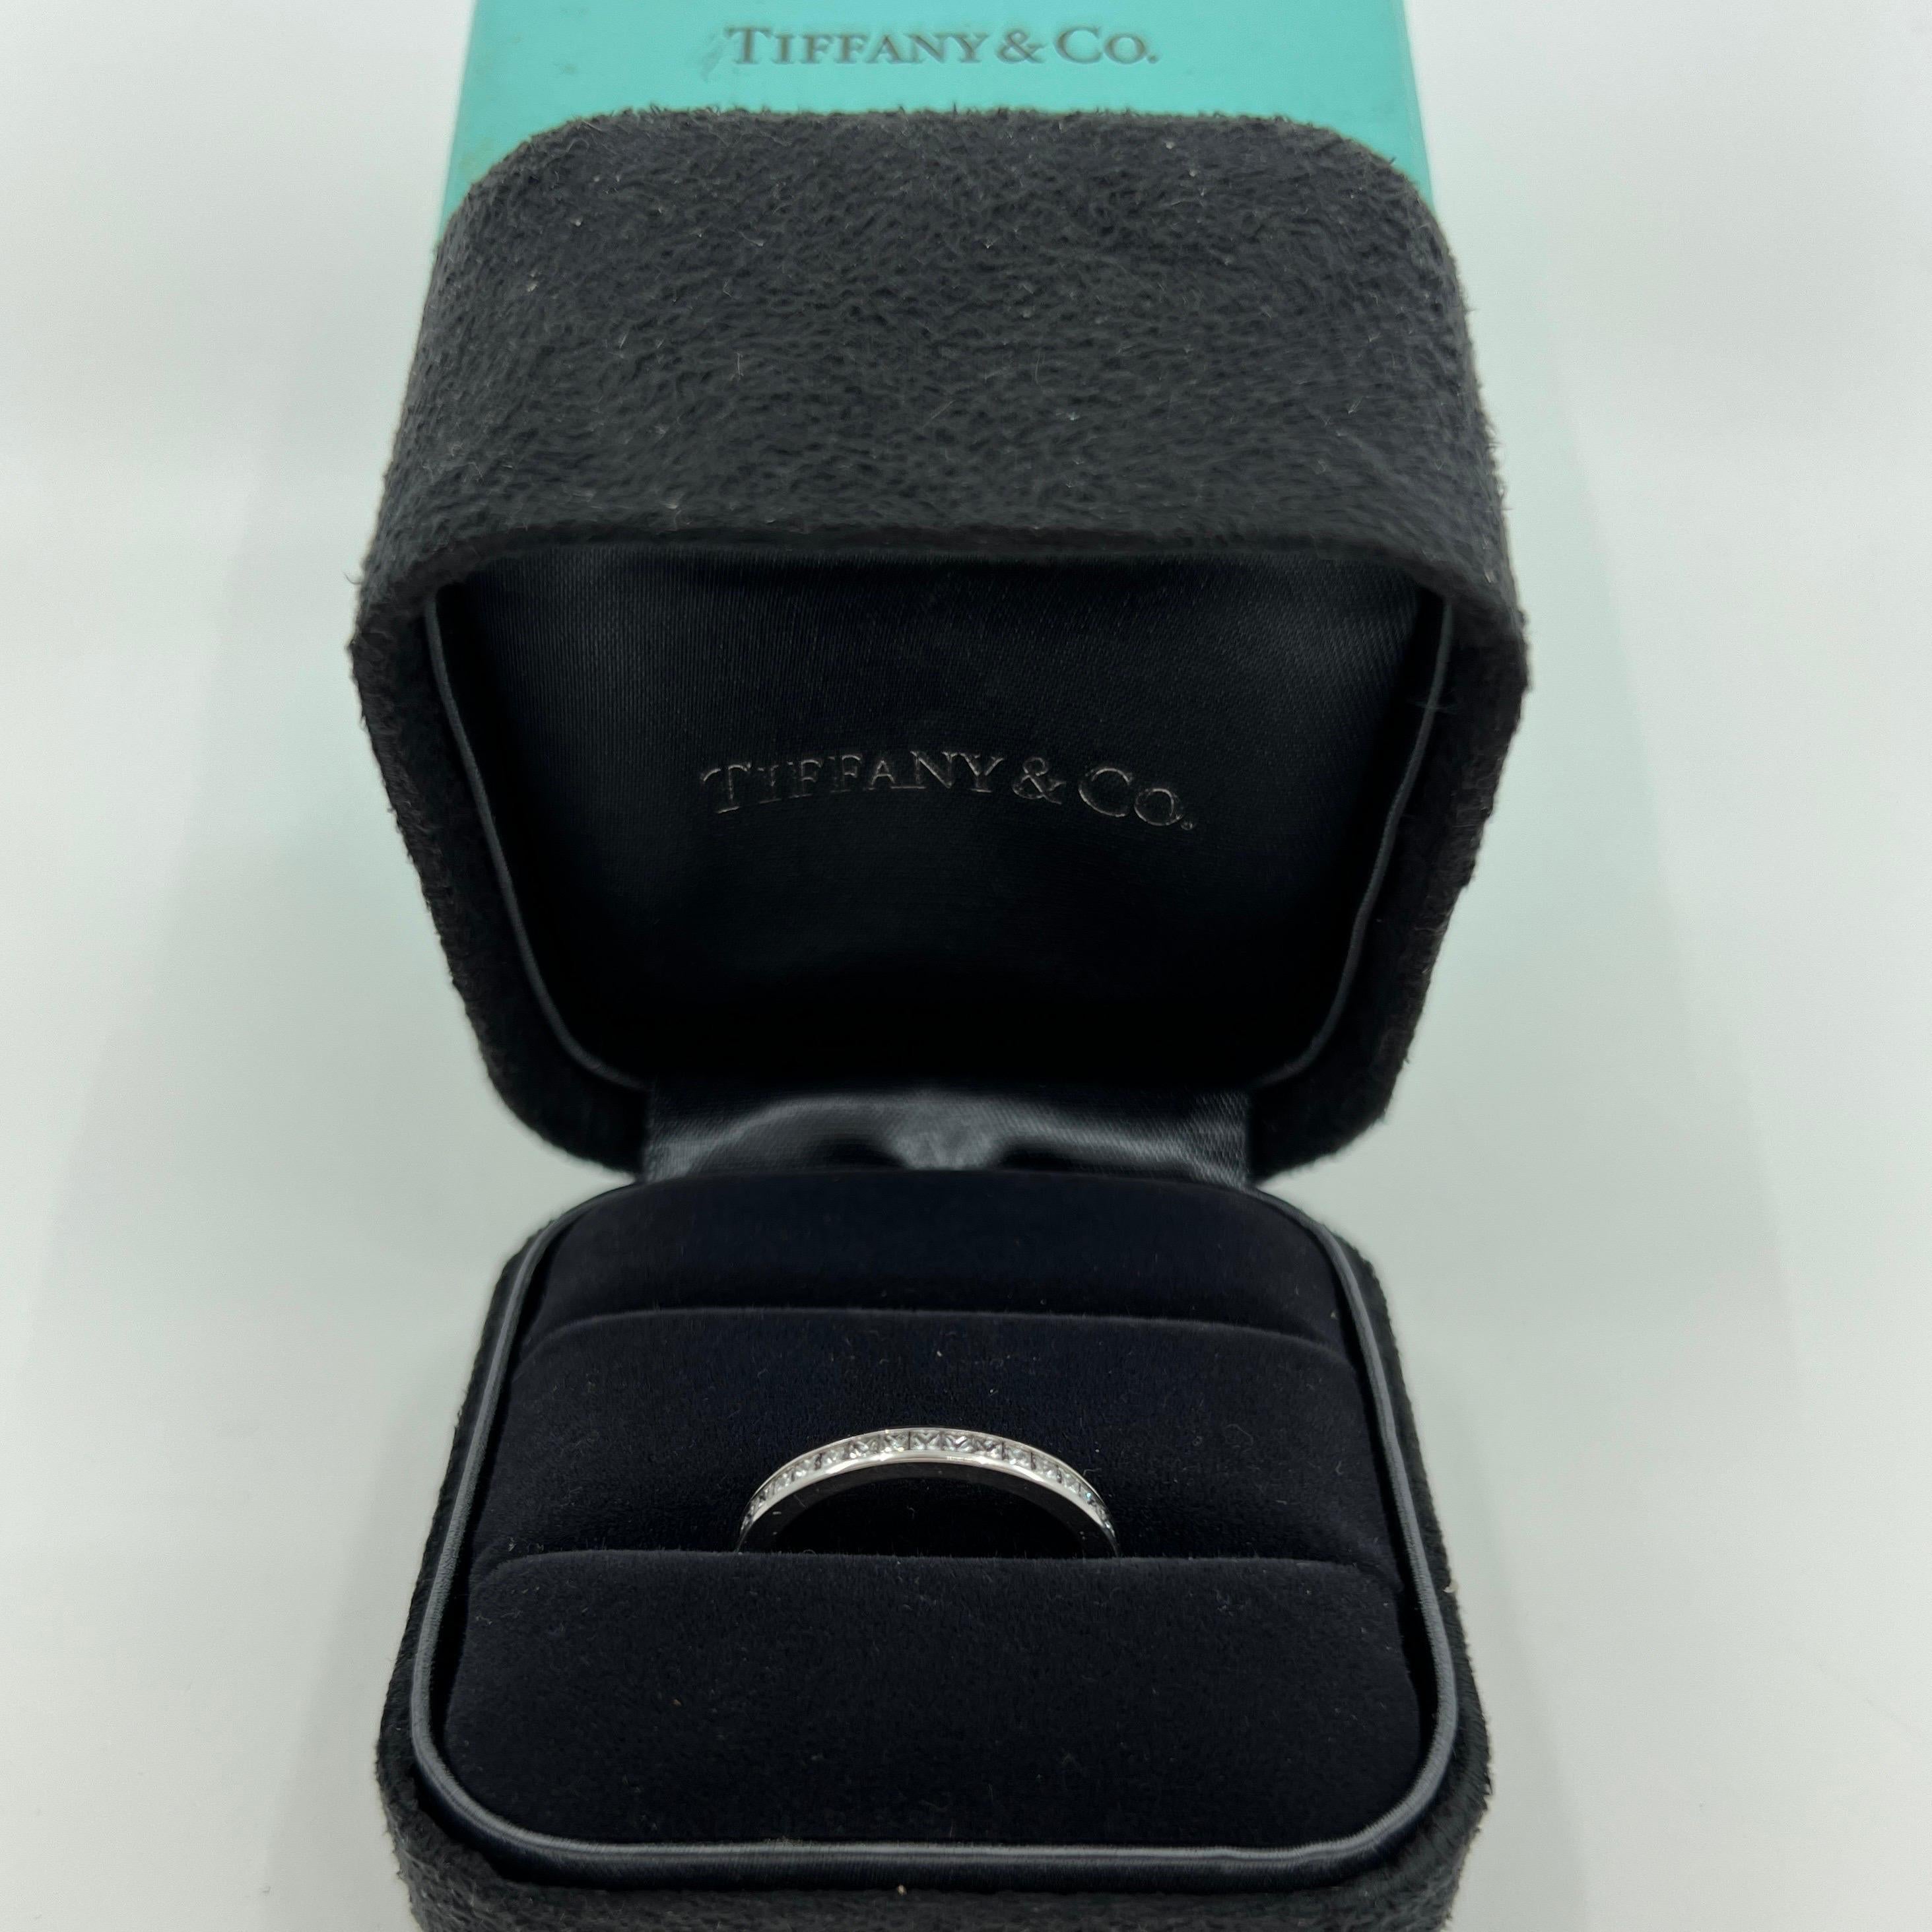 Tiffany & Co Princess Cut Diamond 950 Platinum Eternity Ring.

Stunning platinum Tiffany eternity ring, set with x38 1.6mm princess cut diamonds (approx. 0.70 carat).

Fine jewellery houses like Tiffany only use the finest diamonds and gemstones in